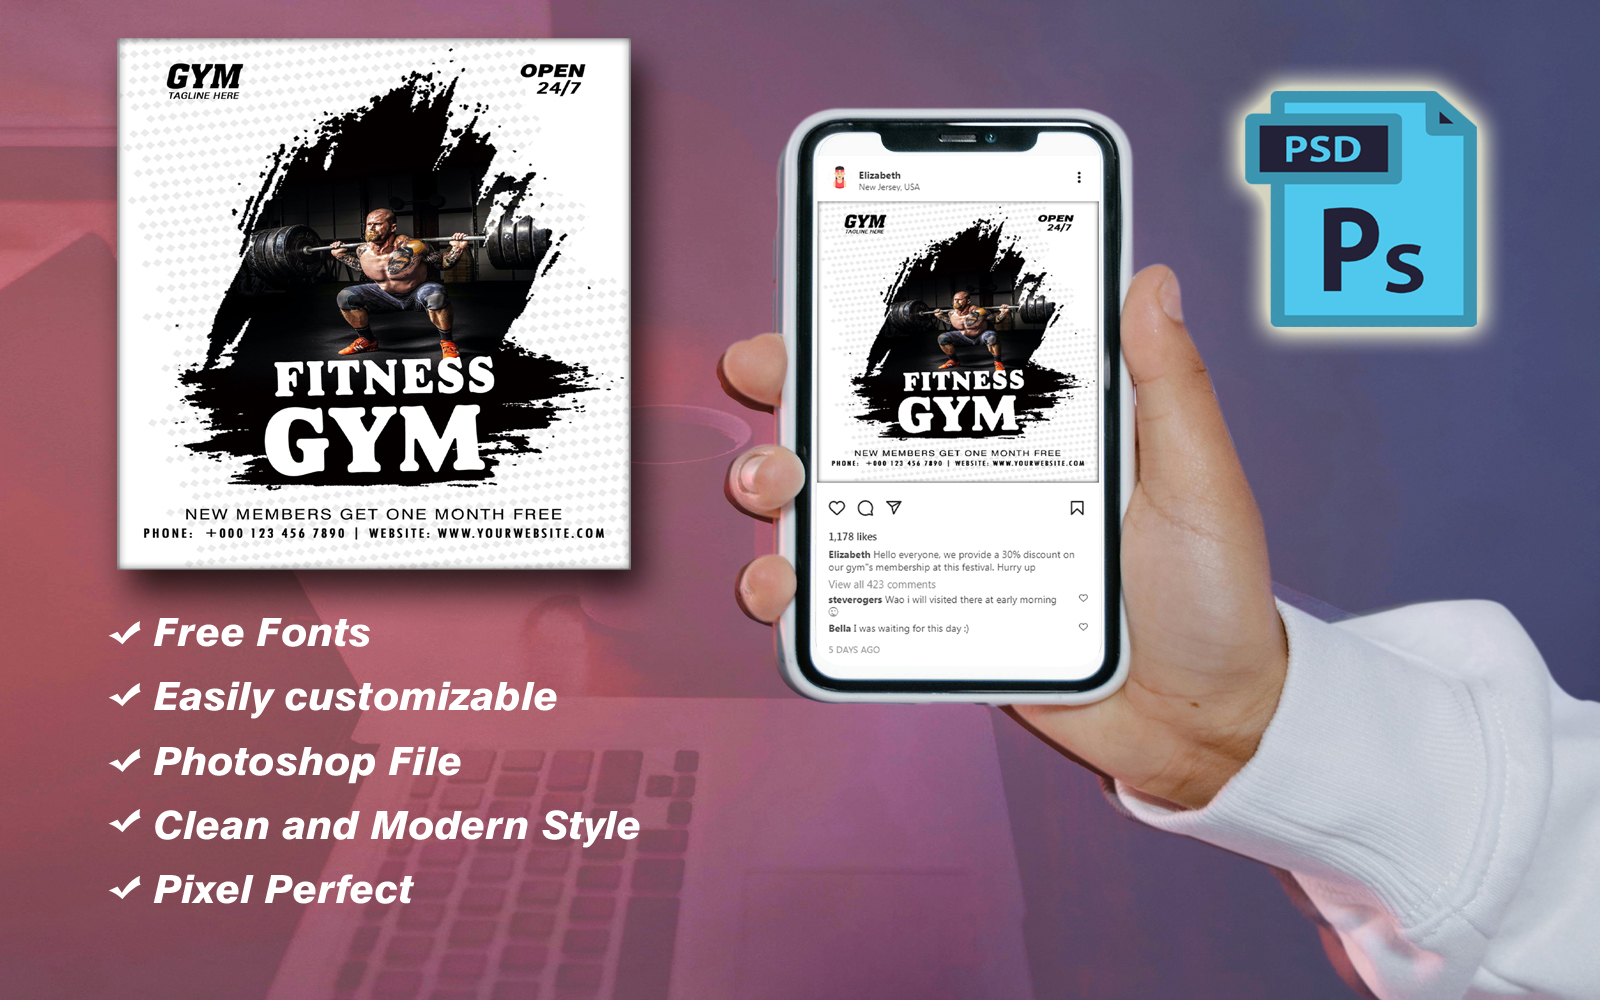 Gym Fitness Discount Template in PSD Format - Photoshop